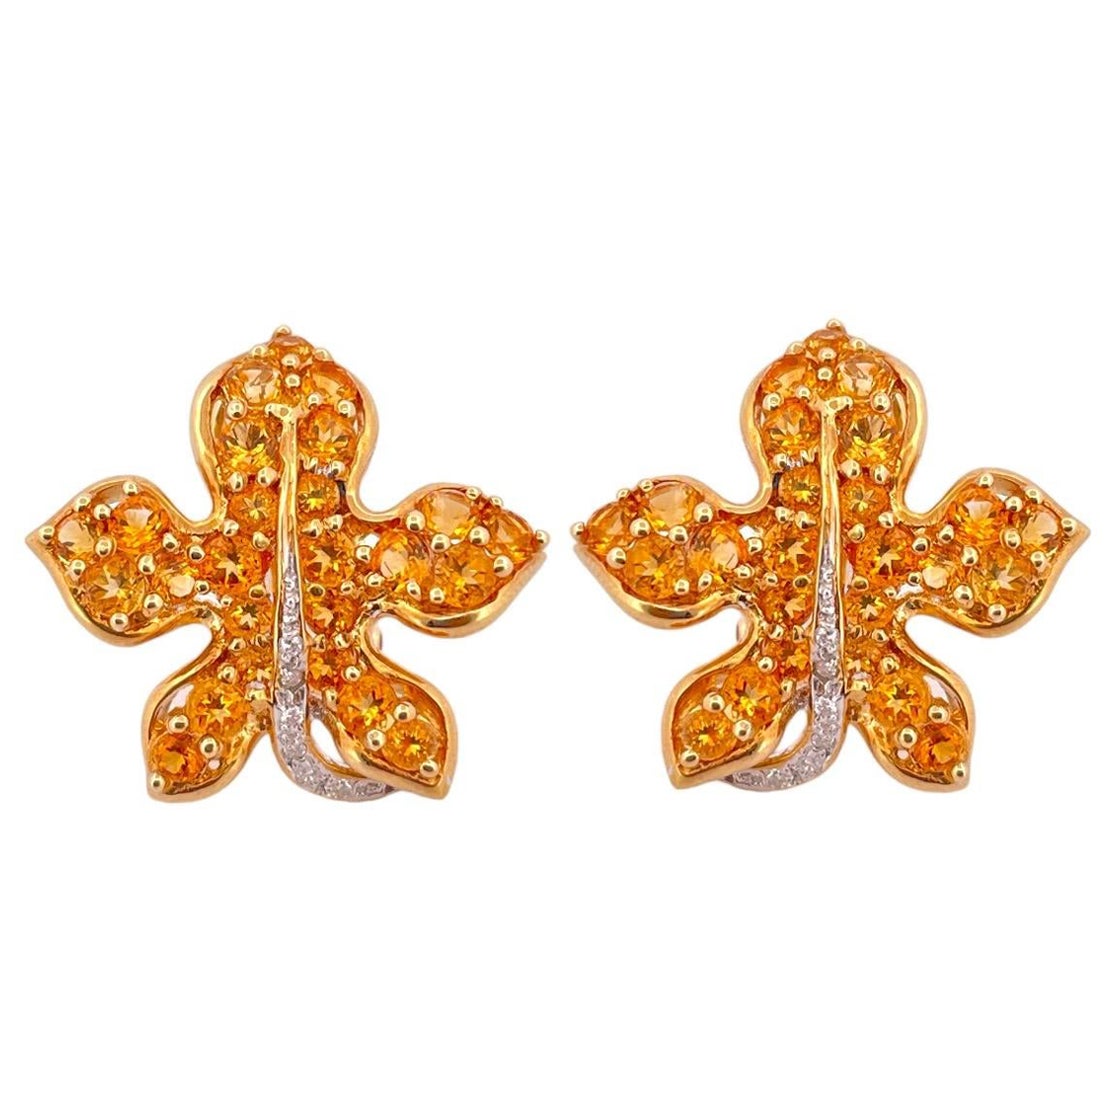 Natural Citrine Leaf Earrings - 0.10 TCW, 18K Yellow Gold For Sale